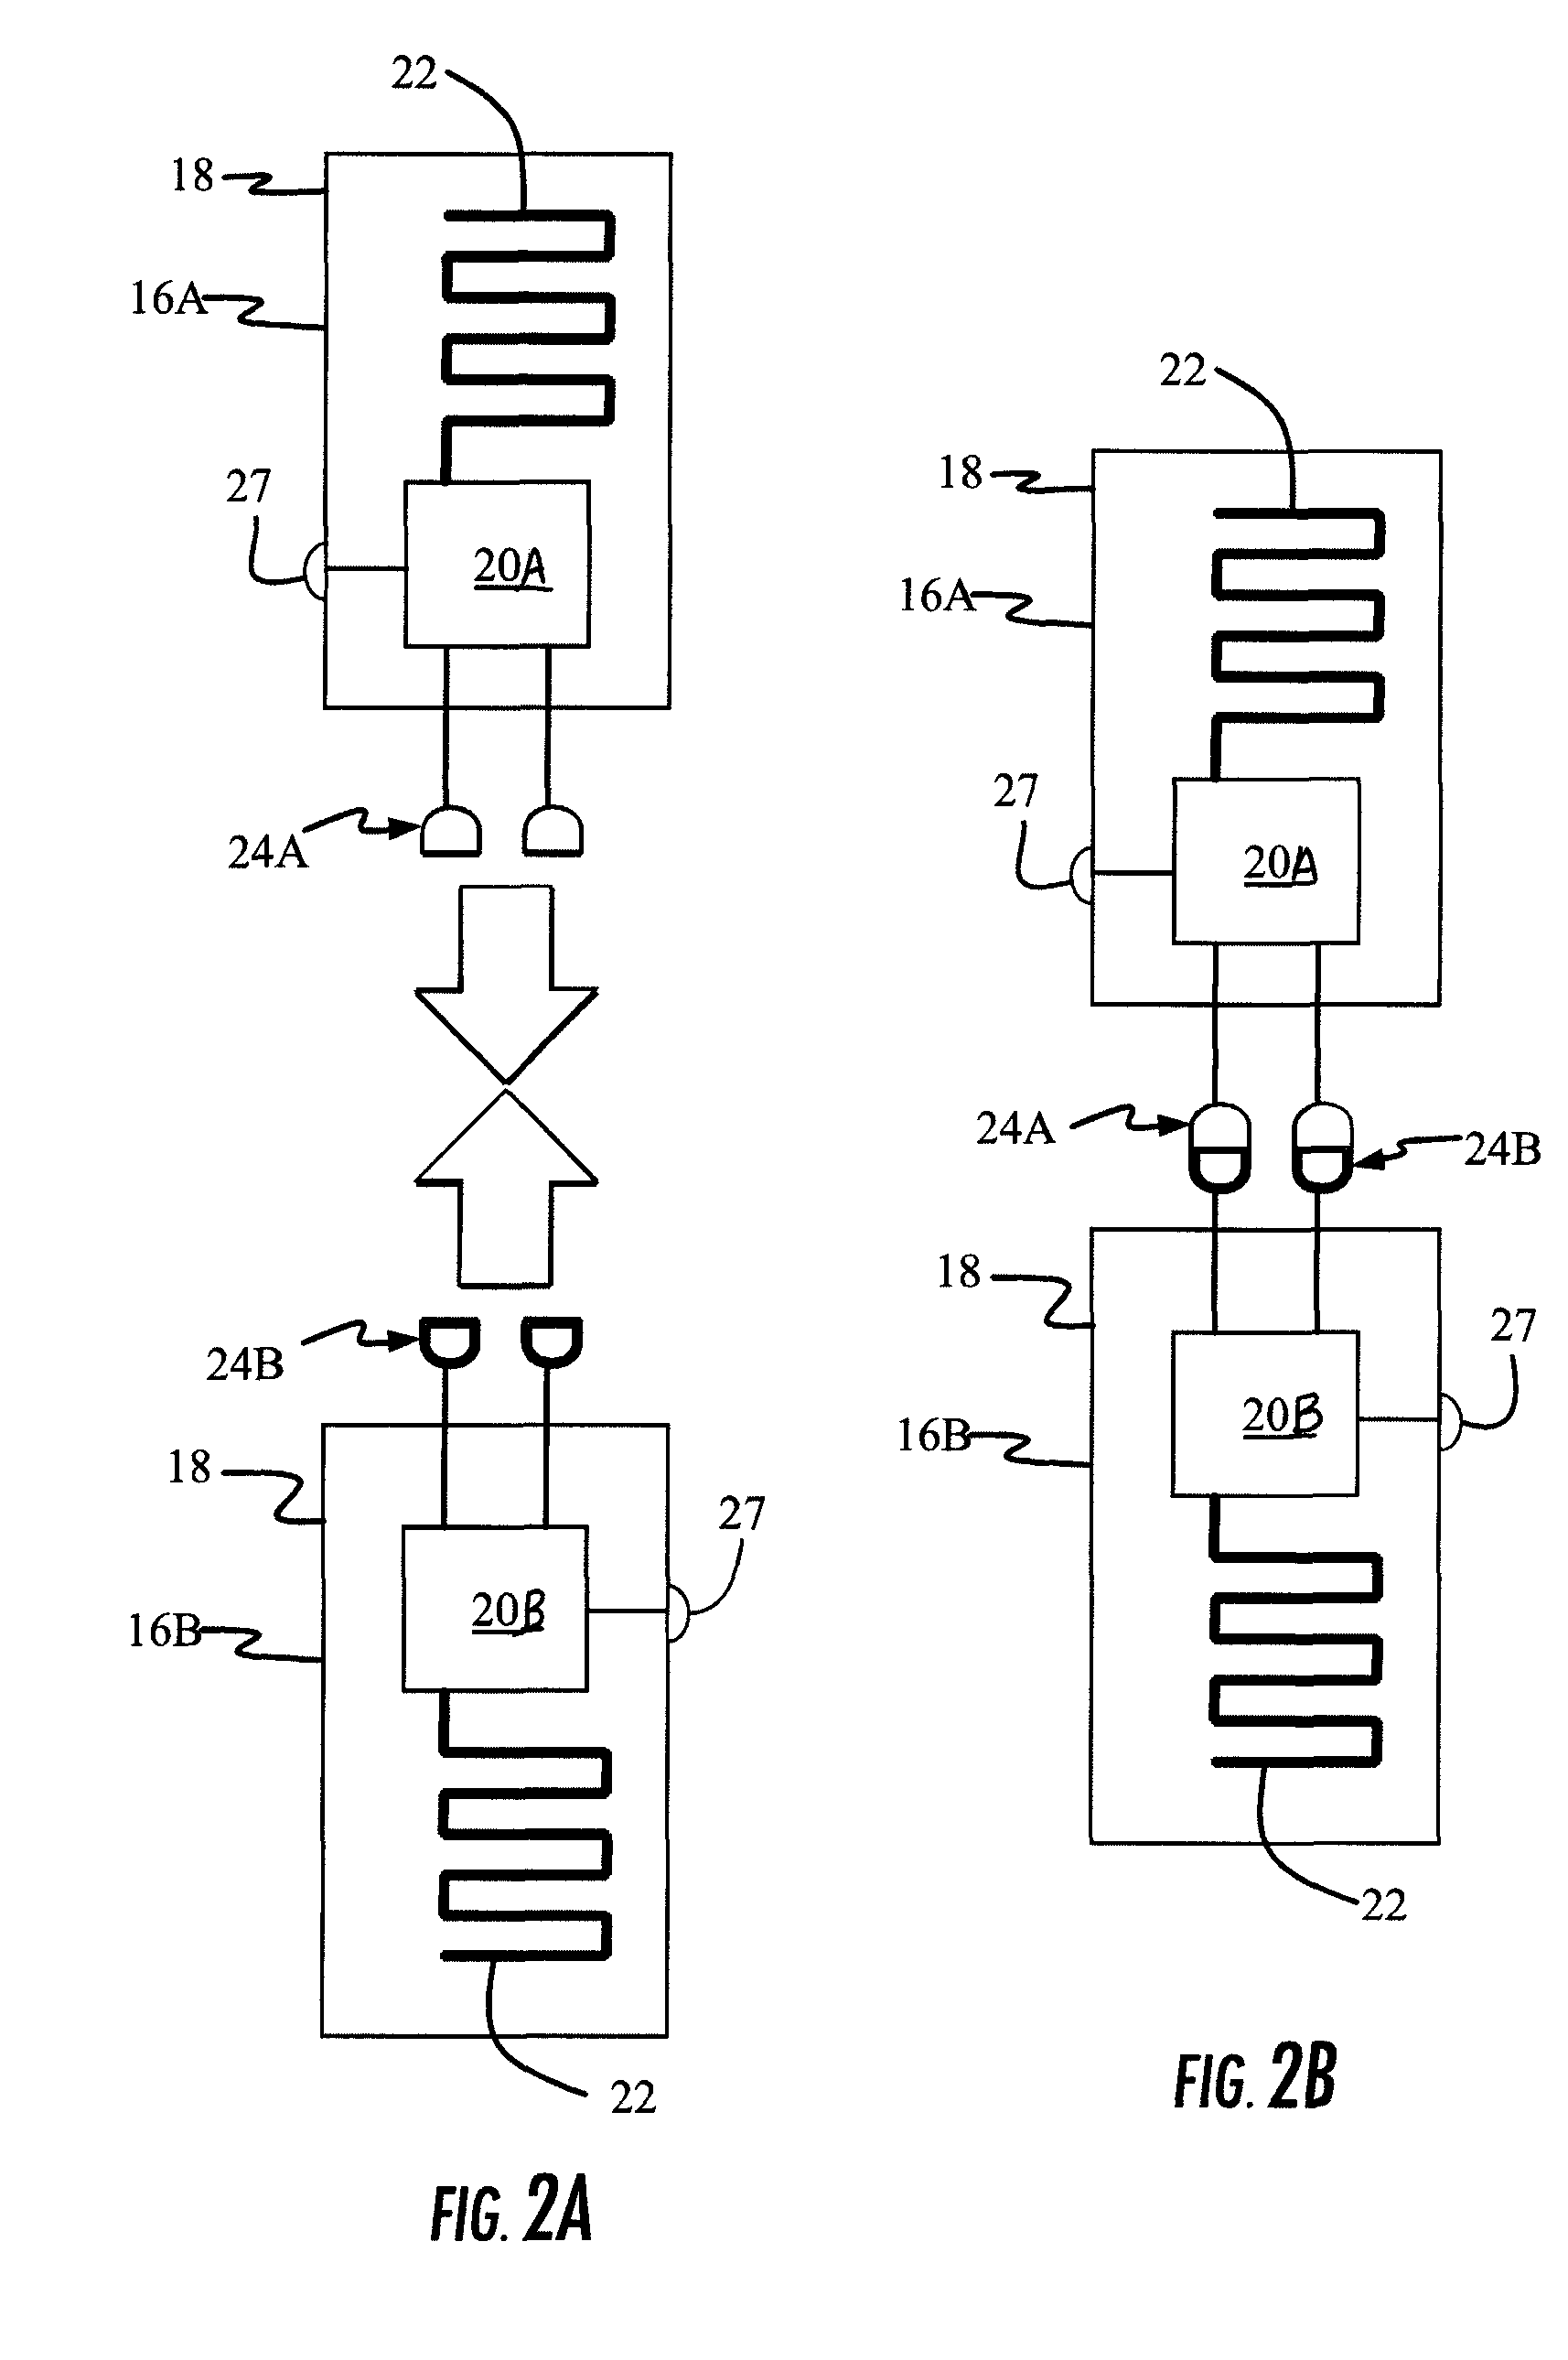 RFID systems and methods for automatically detecting and/or directing the physical configuration of a complex system